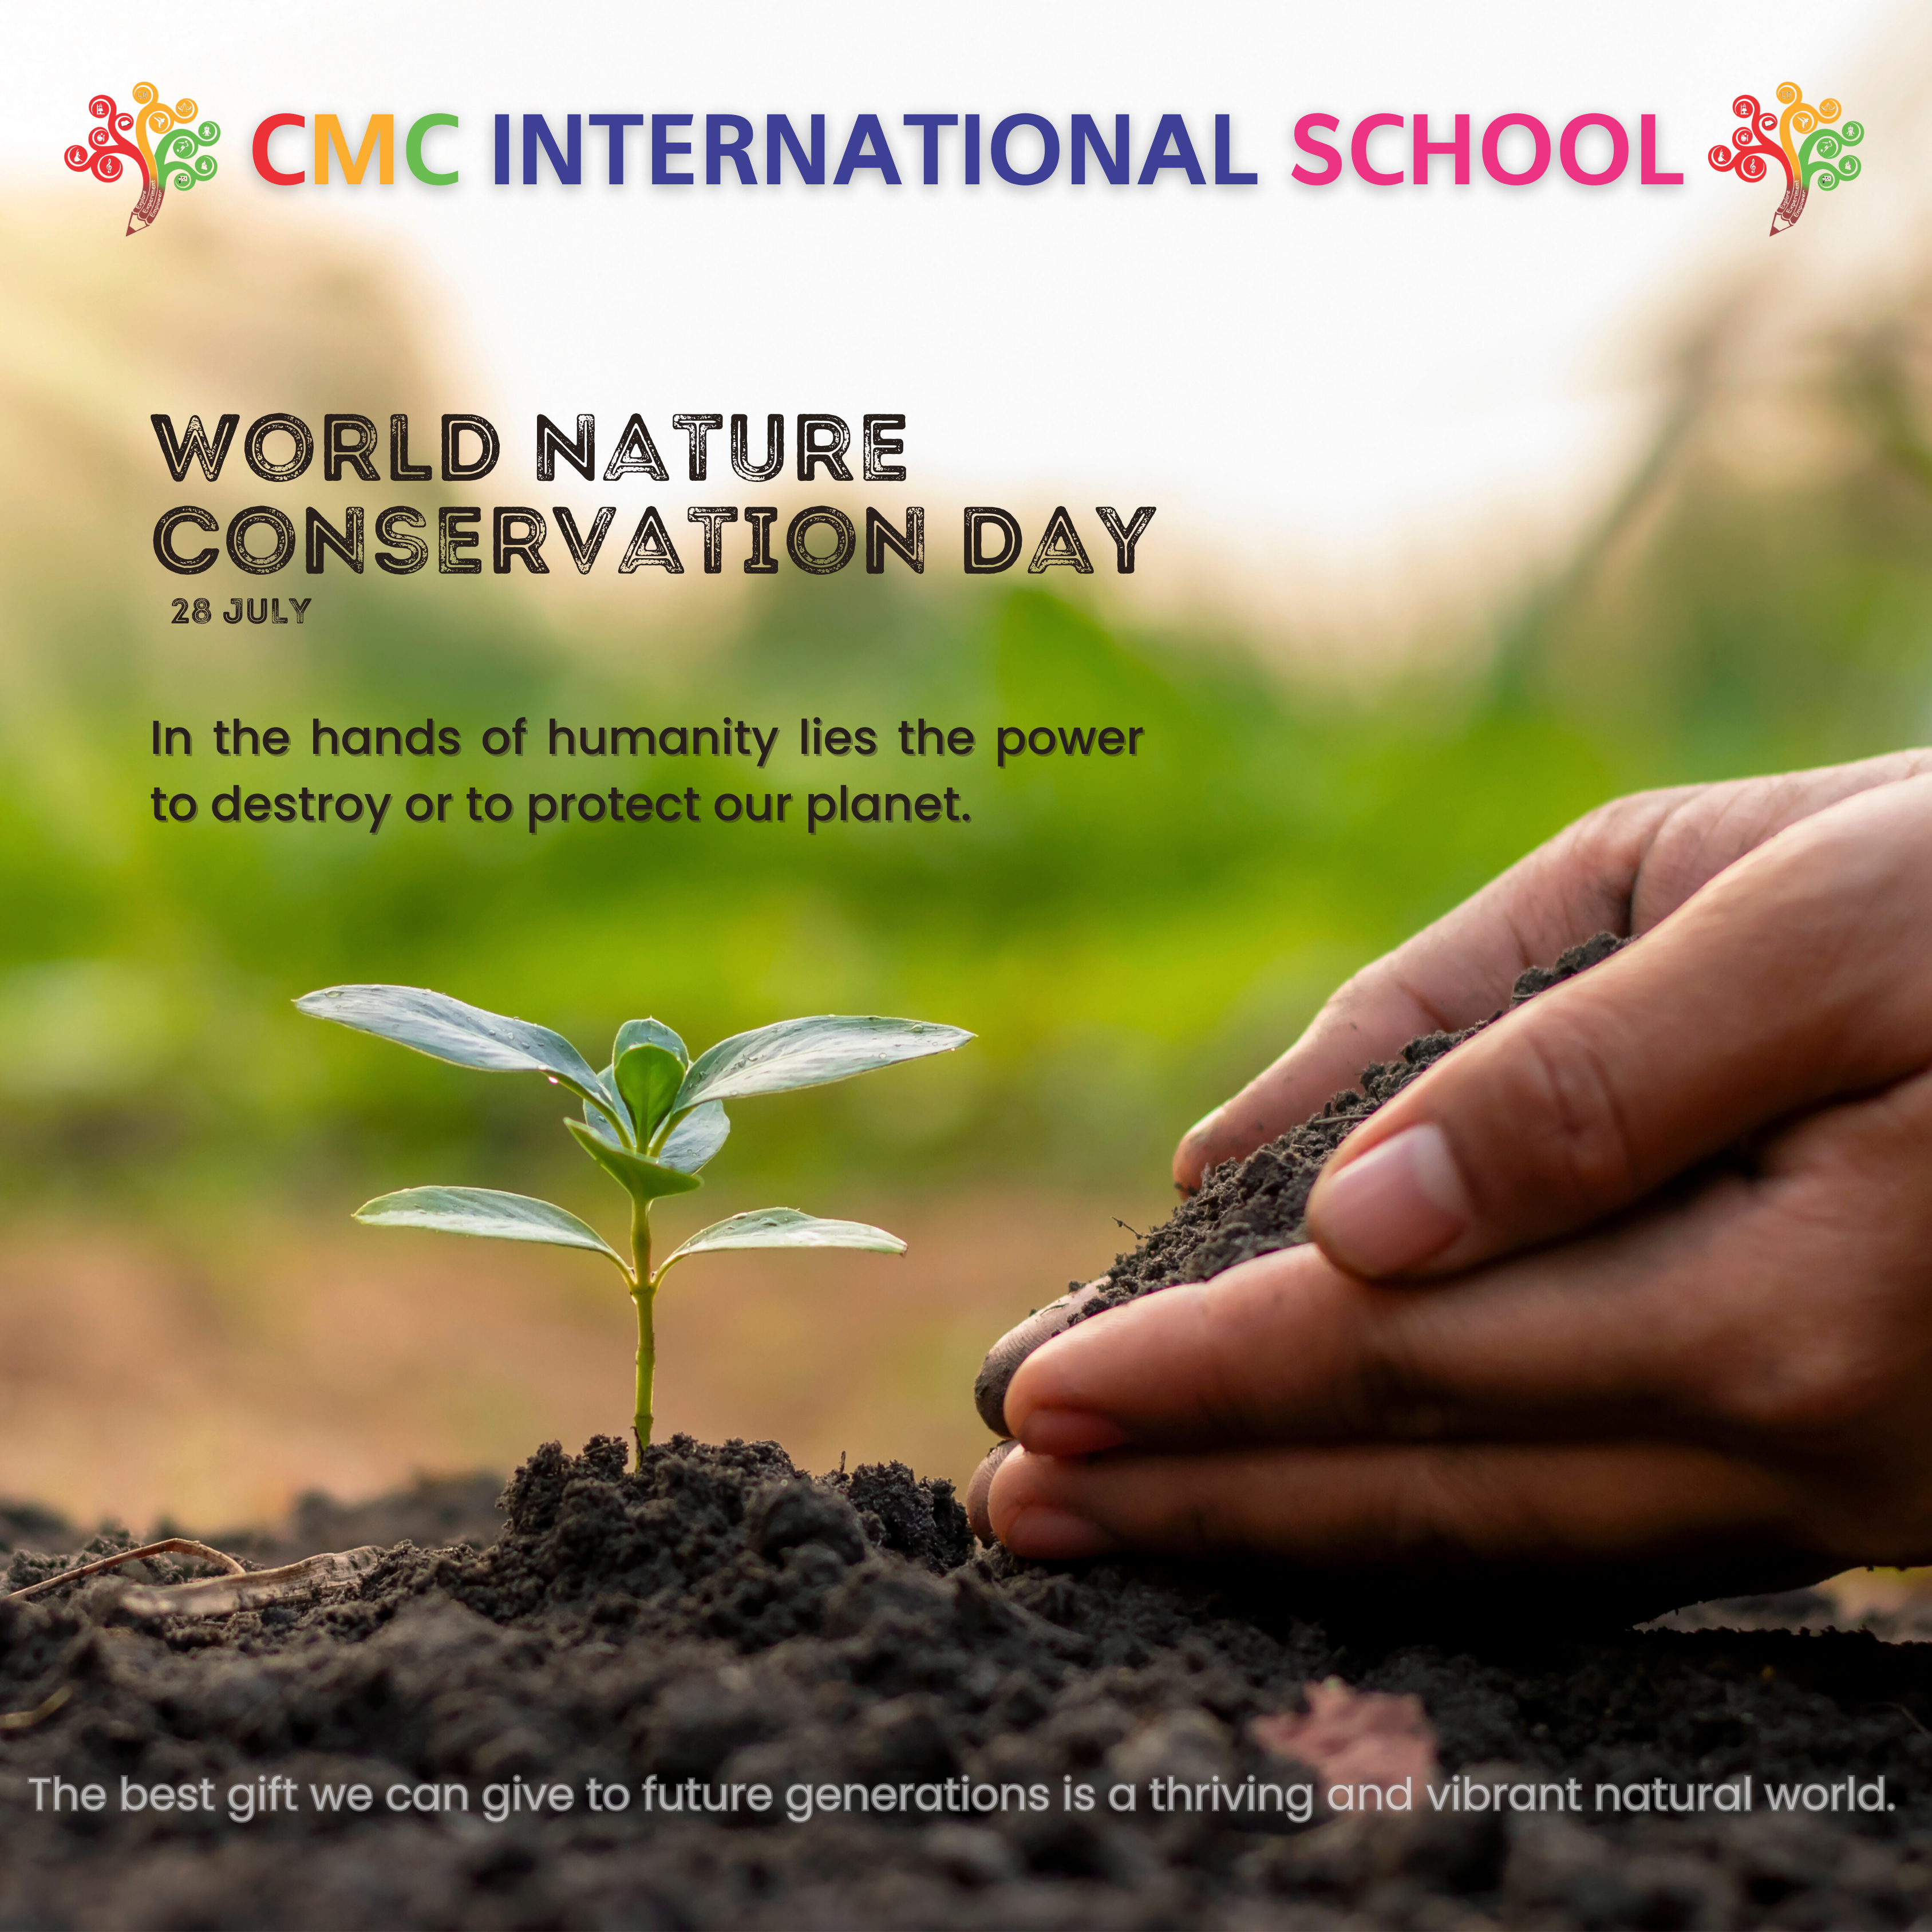 20230728101536_28_JULY_2023_WORLD_NATURE_CONSERVATIONA_DAY.png